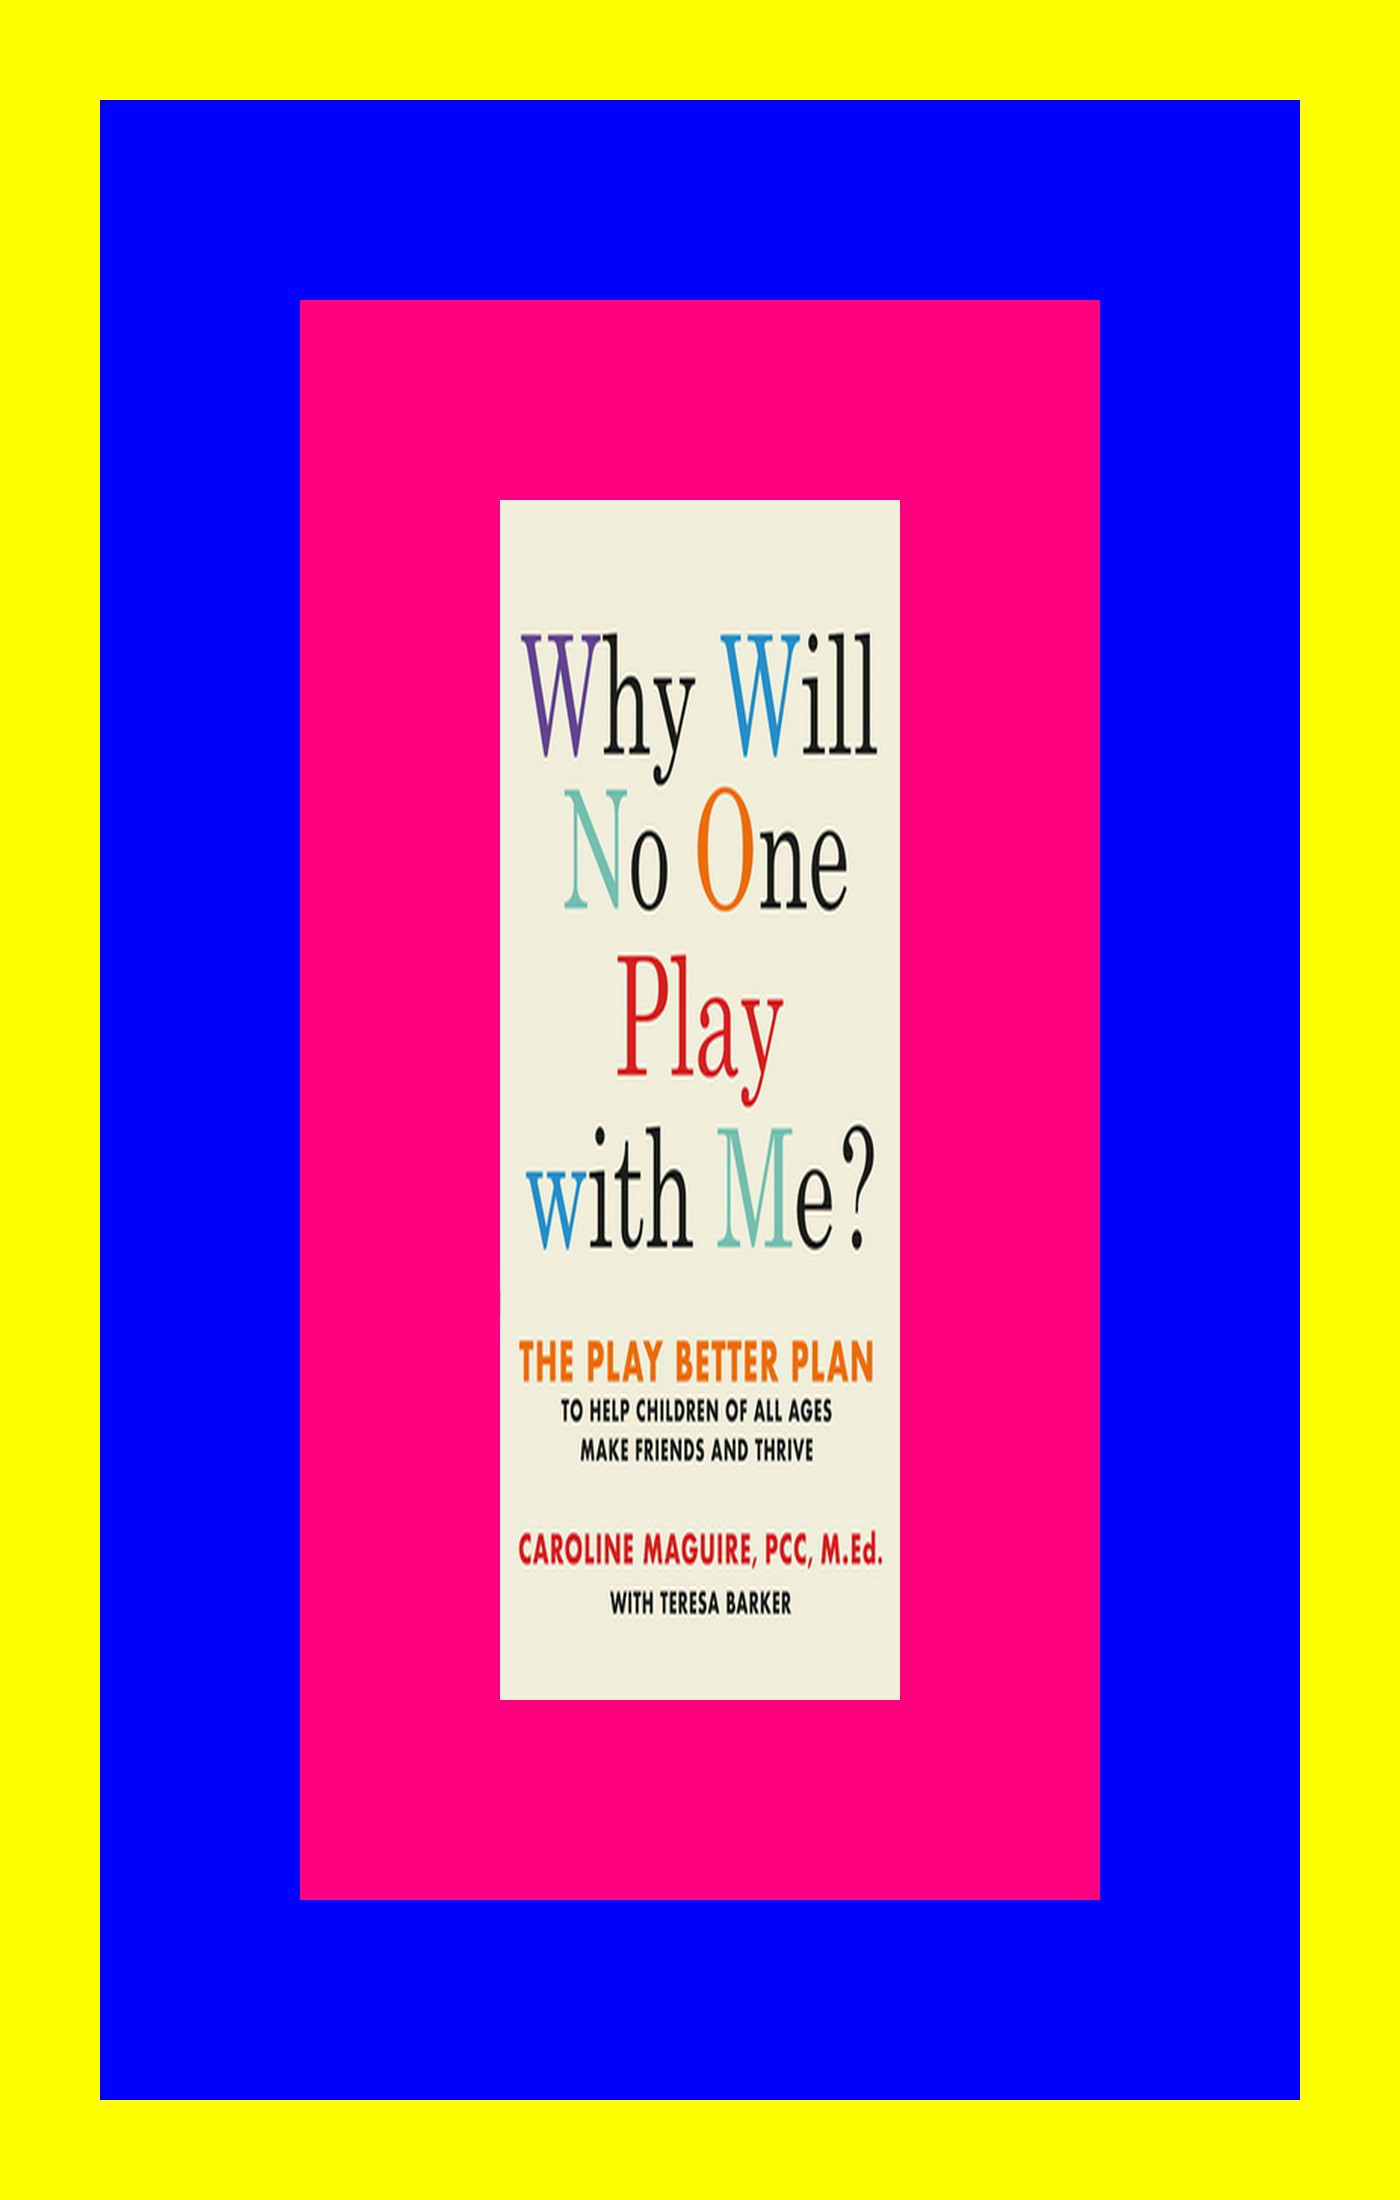 Why Will No One Play with Me?: The Play Better Plan to Help